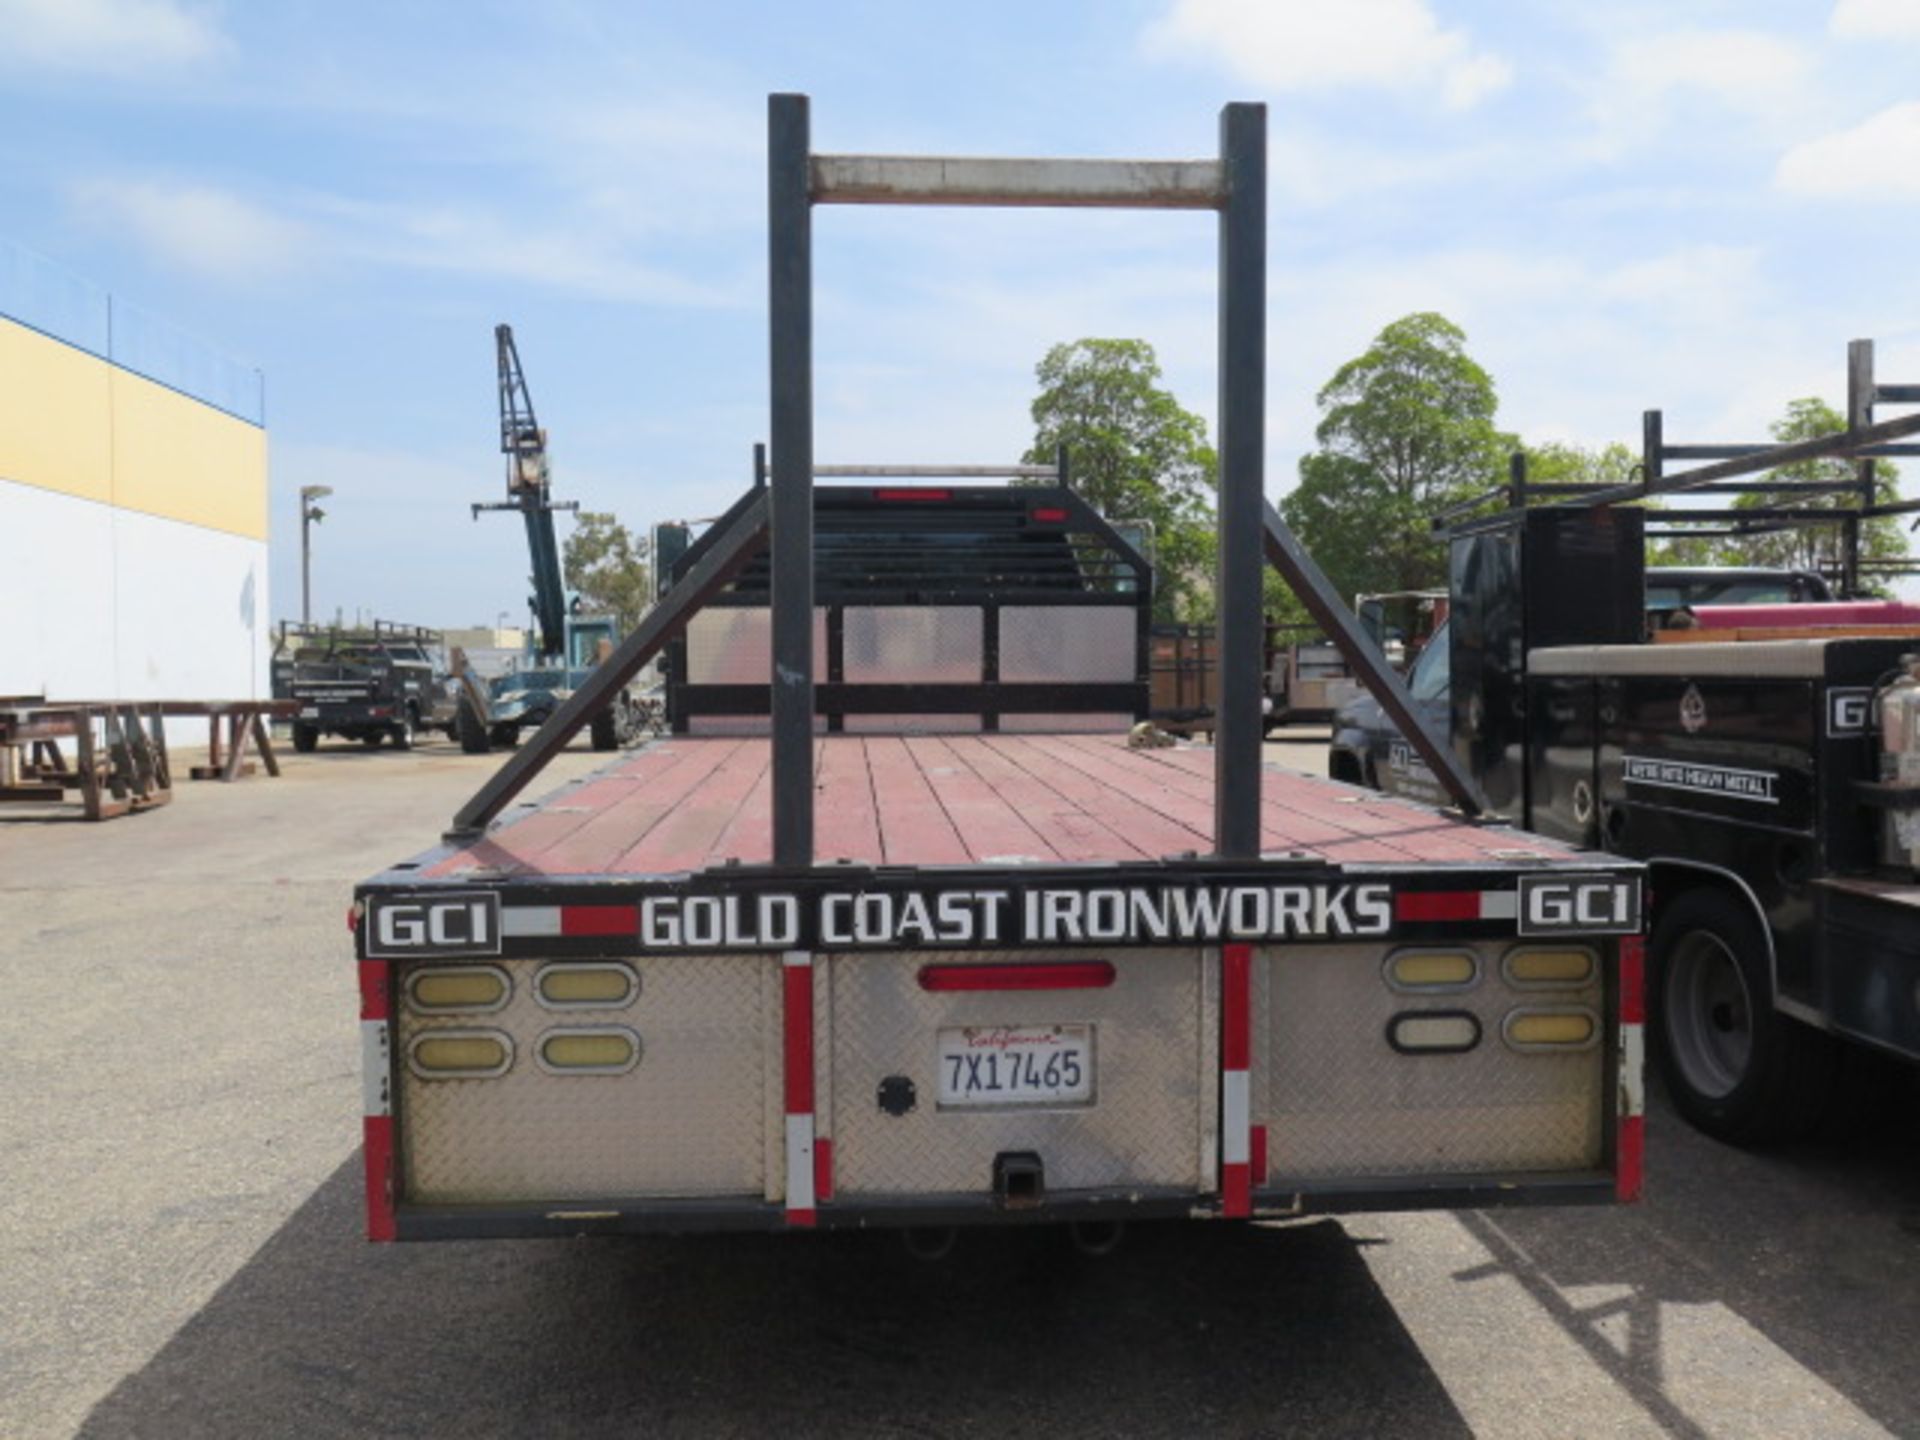 1998 GMC C5500 15’ Flatbed Truck Lisc# 7X17465 w/ 6.0L LPG Engine, 5-Speed Manual Trans, 26,000 - Image 6 of 20